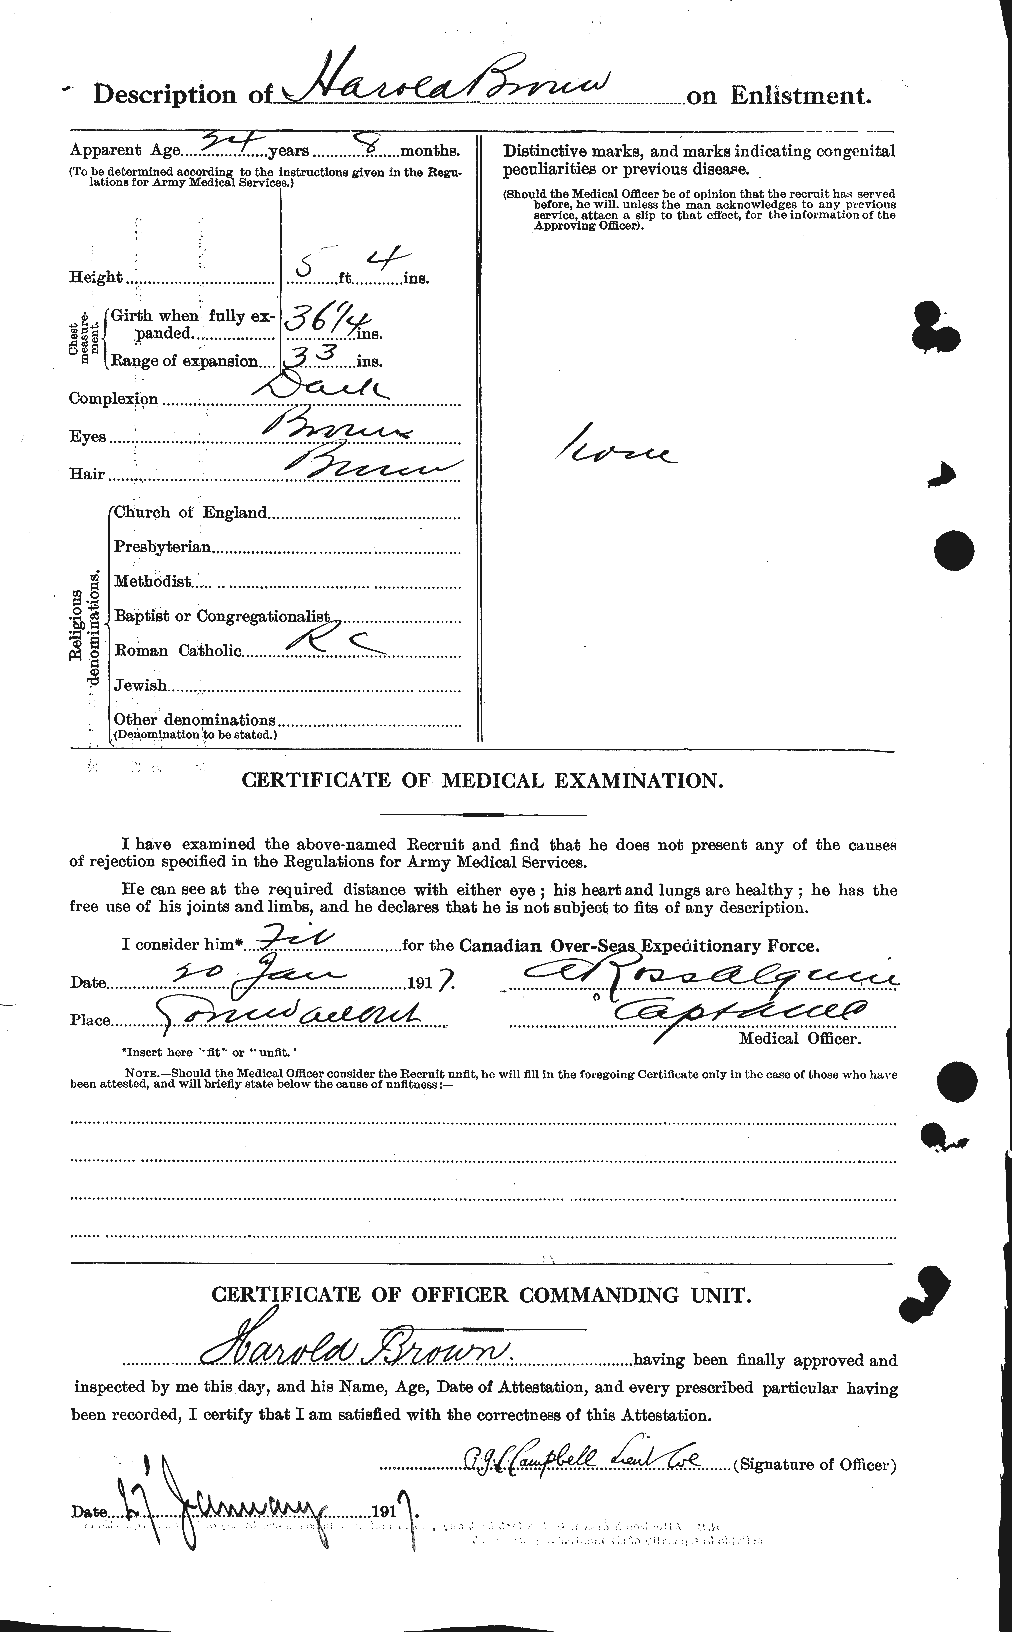 Personnel Records of the First World War - CEF 262667b